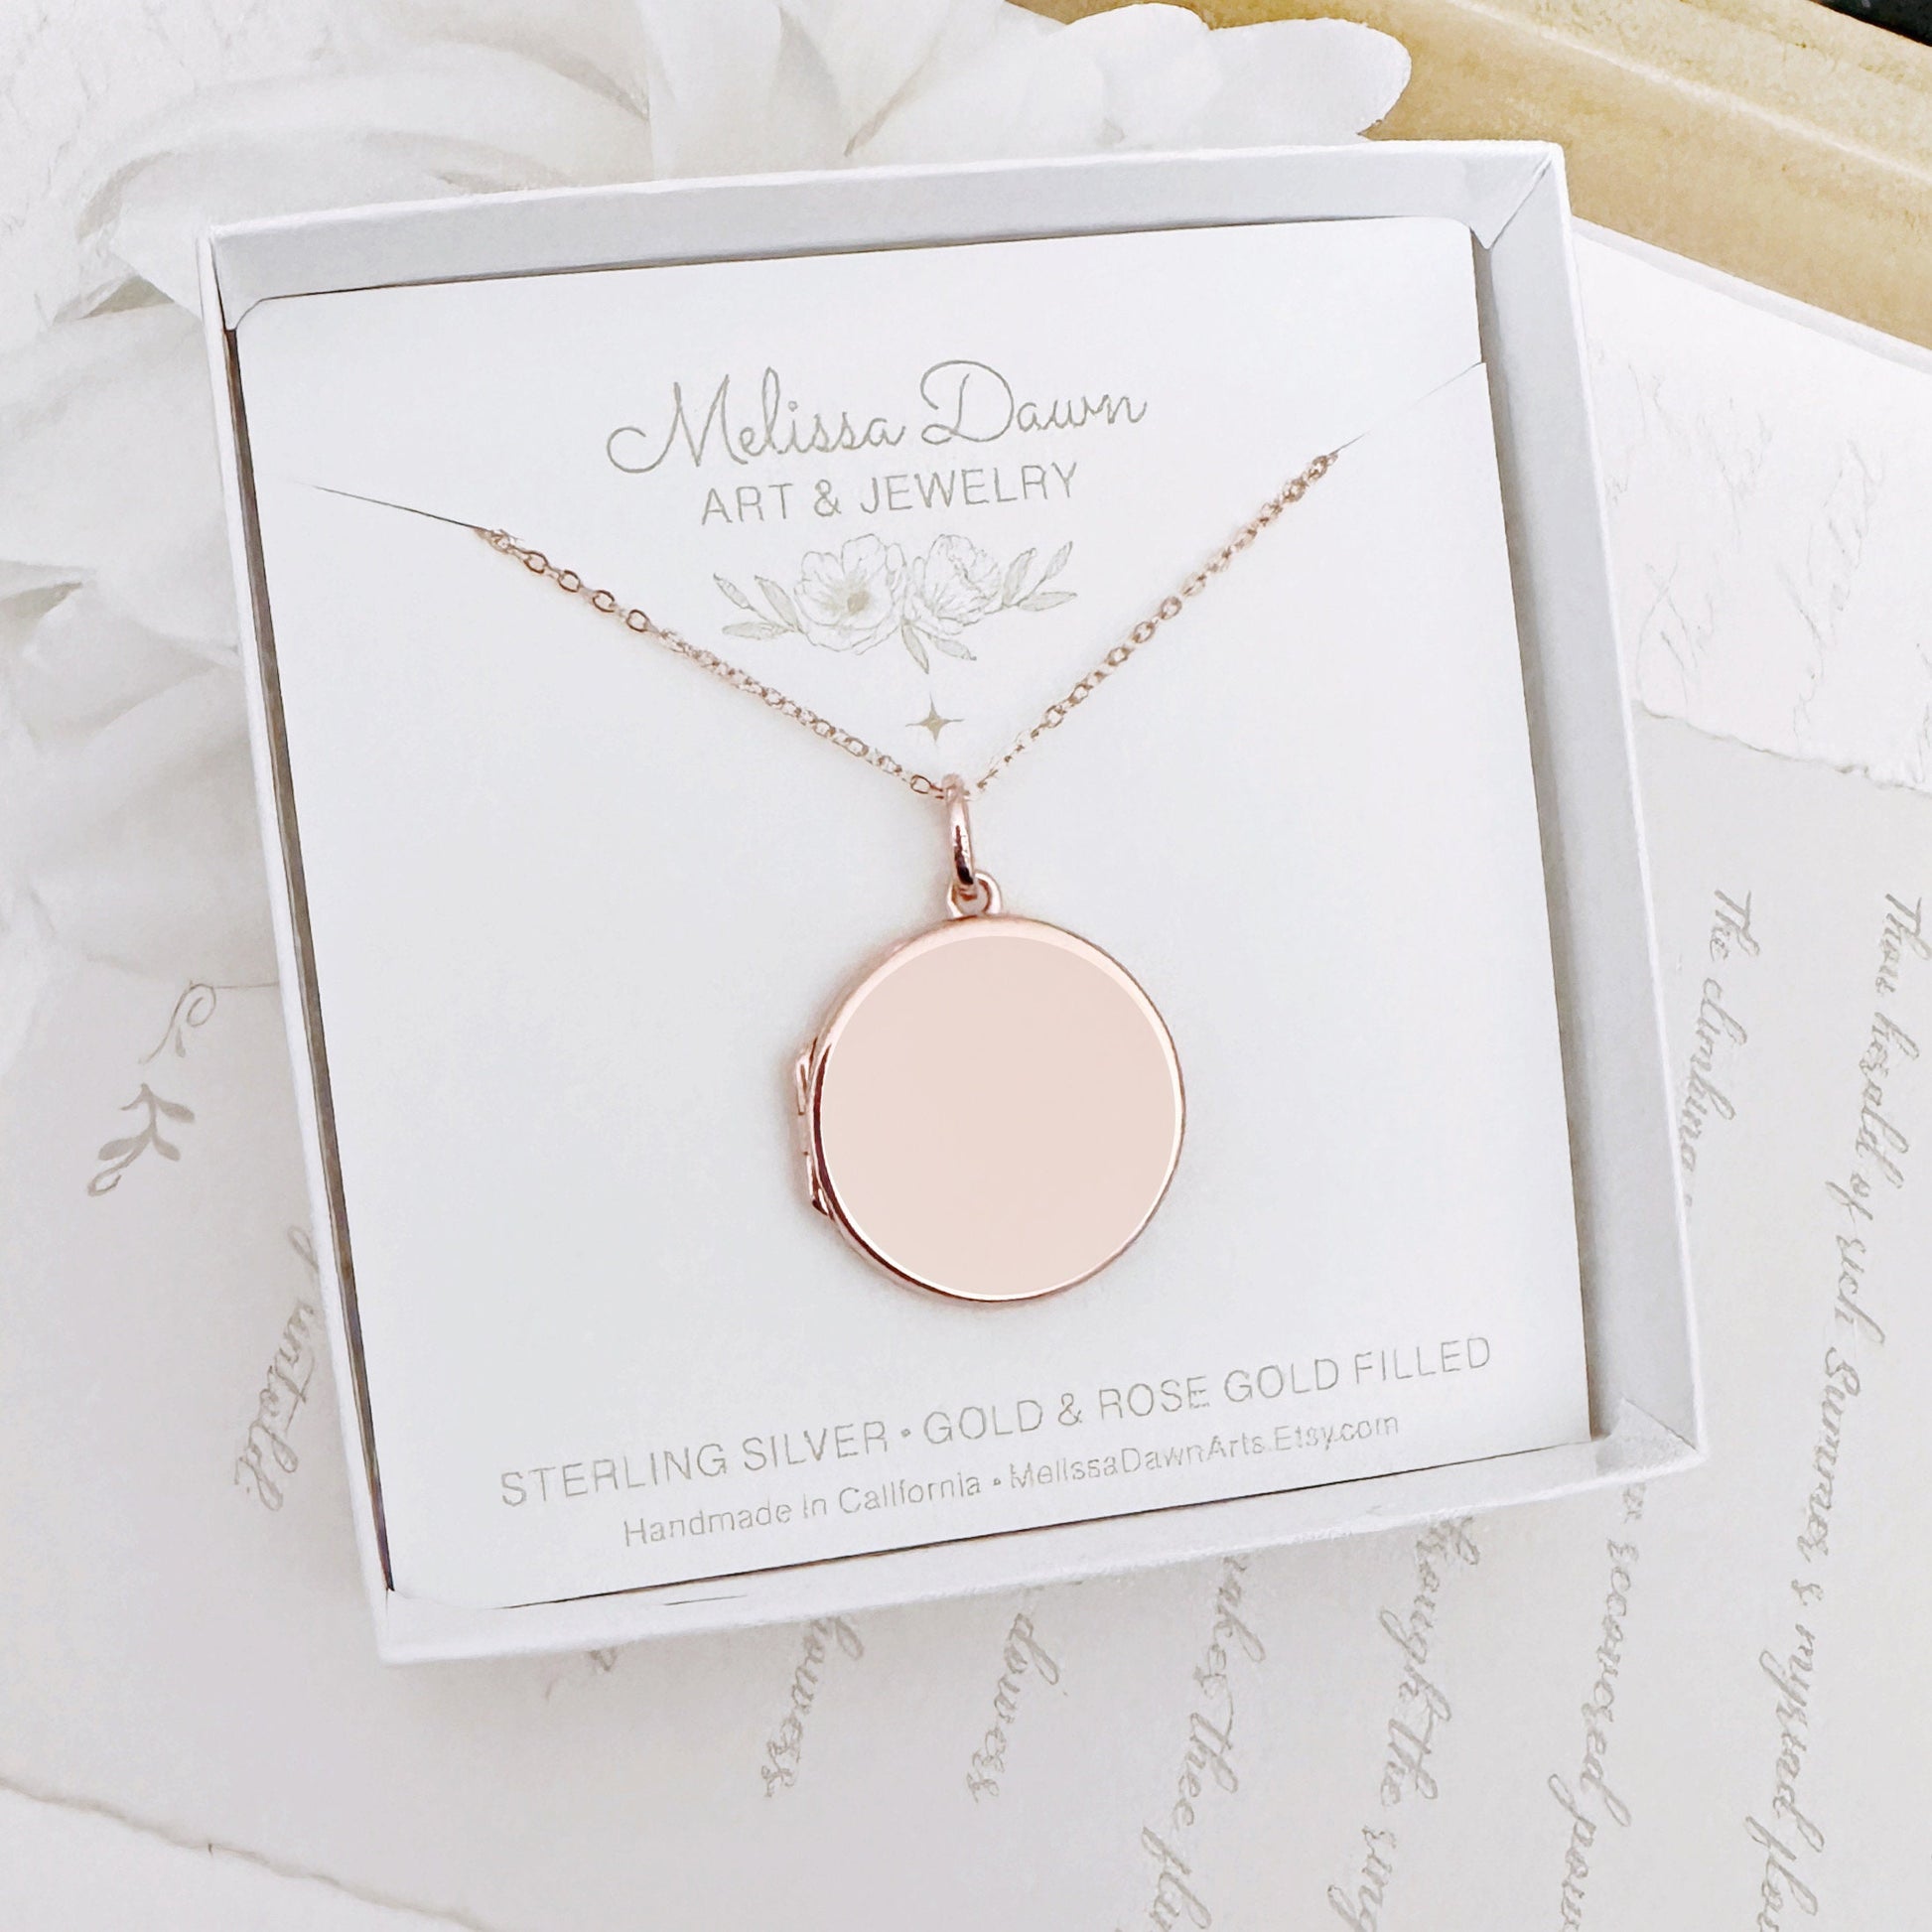 sterling silver lockets, rose gold filled chain, gold filled chain, photo locket, custom photos in gift box